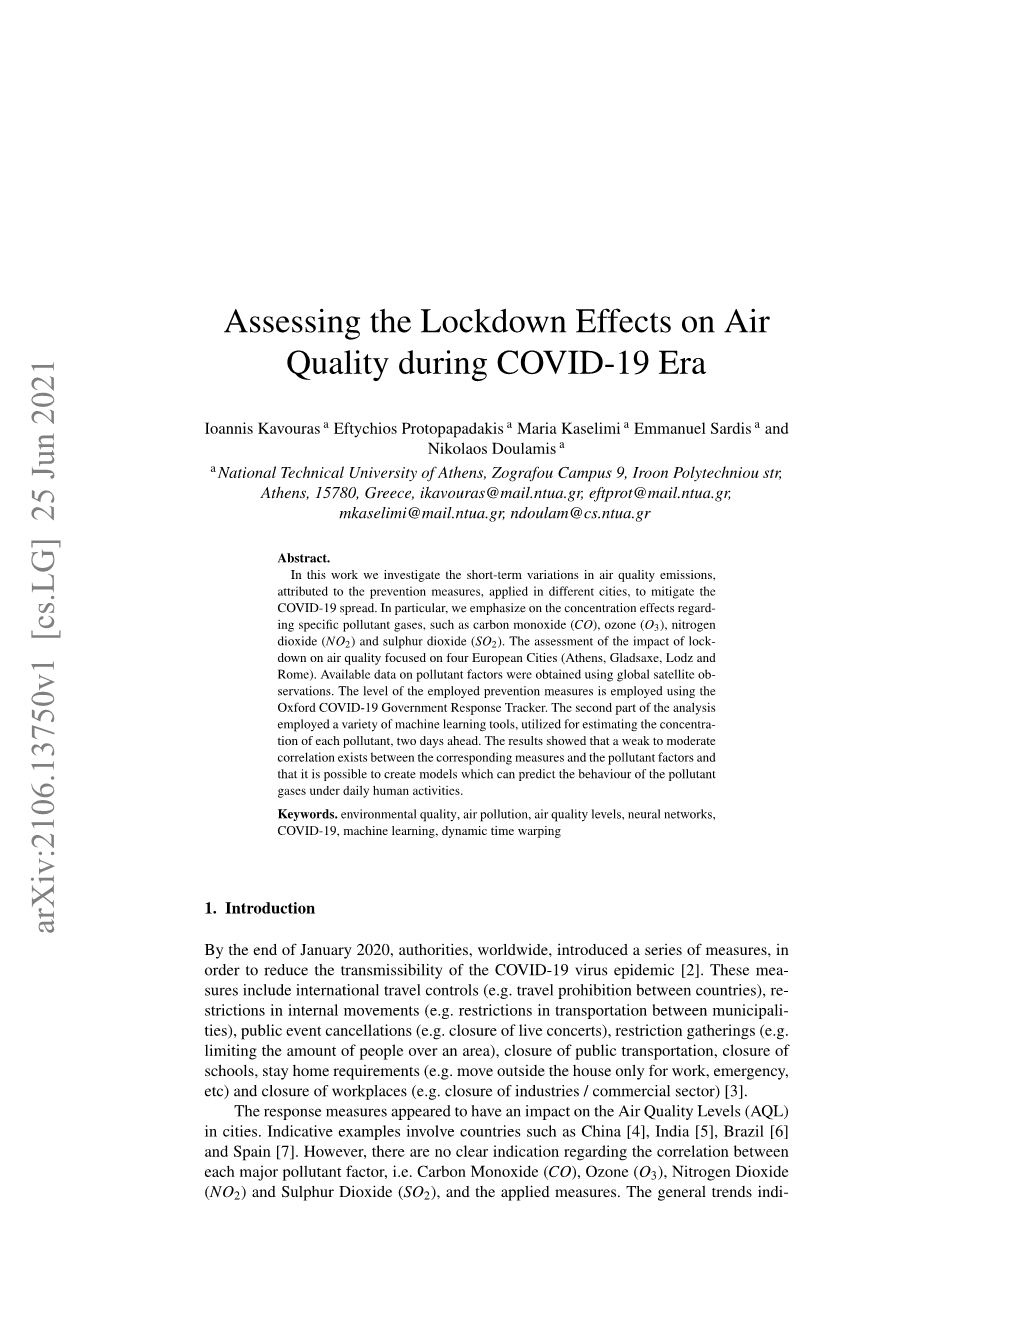 Assessing the Lockdown Effects on Air Quality During COVID-19 Era Arxiv